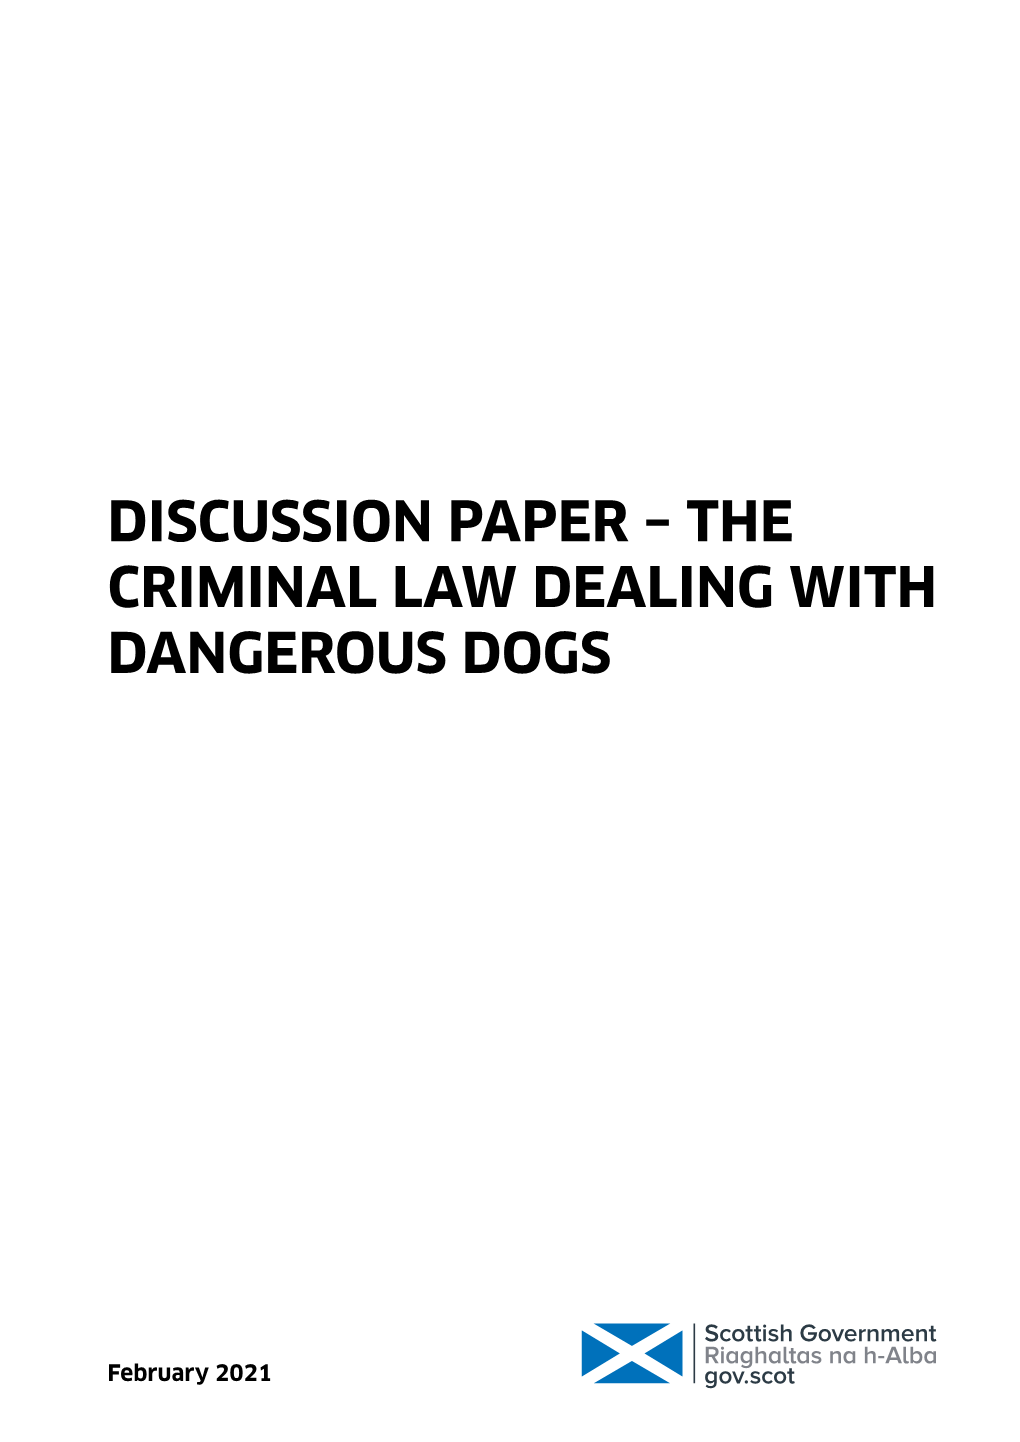 Discussion Paper – the Criminal Law Dealing with Dangerous Dogs